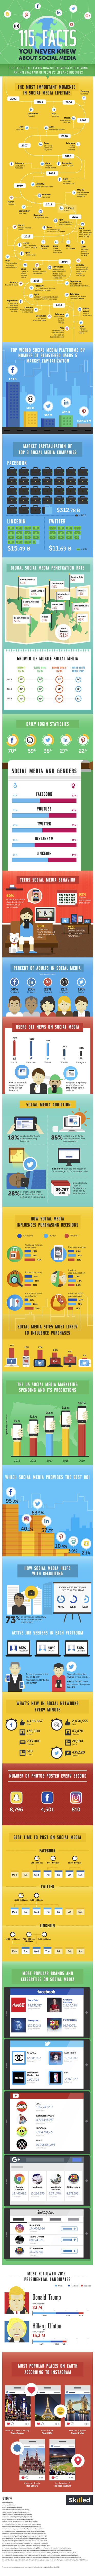 social-media-facts-infographic